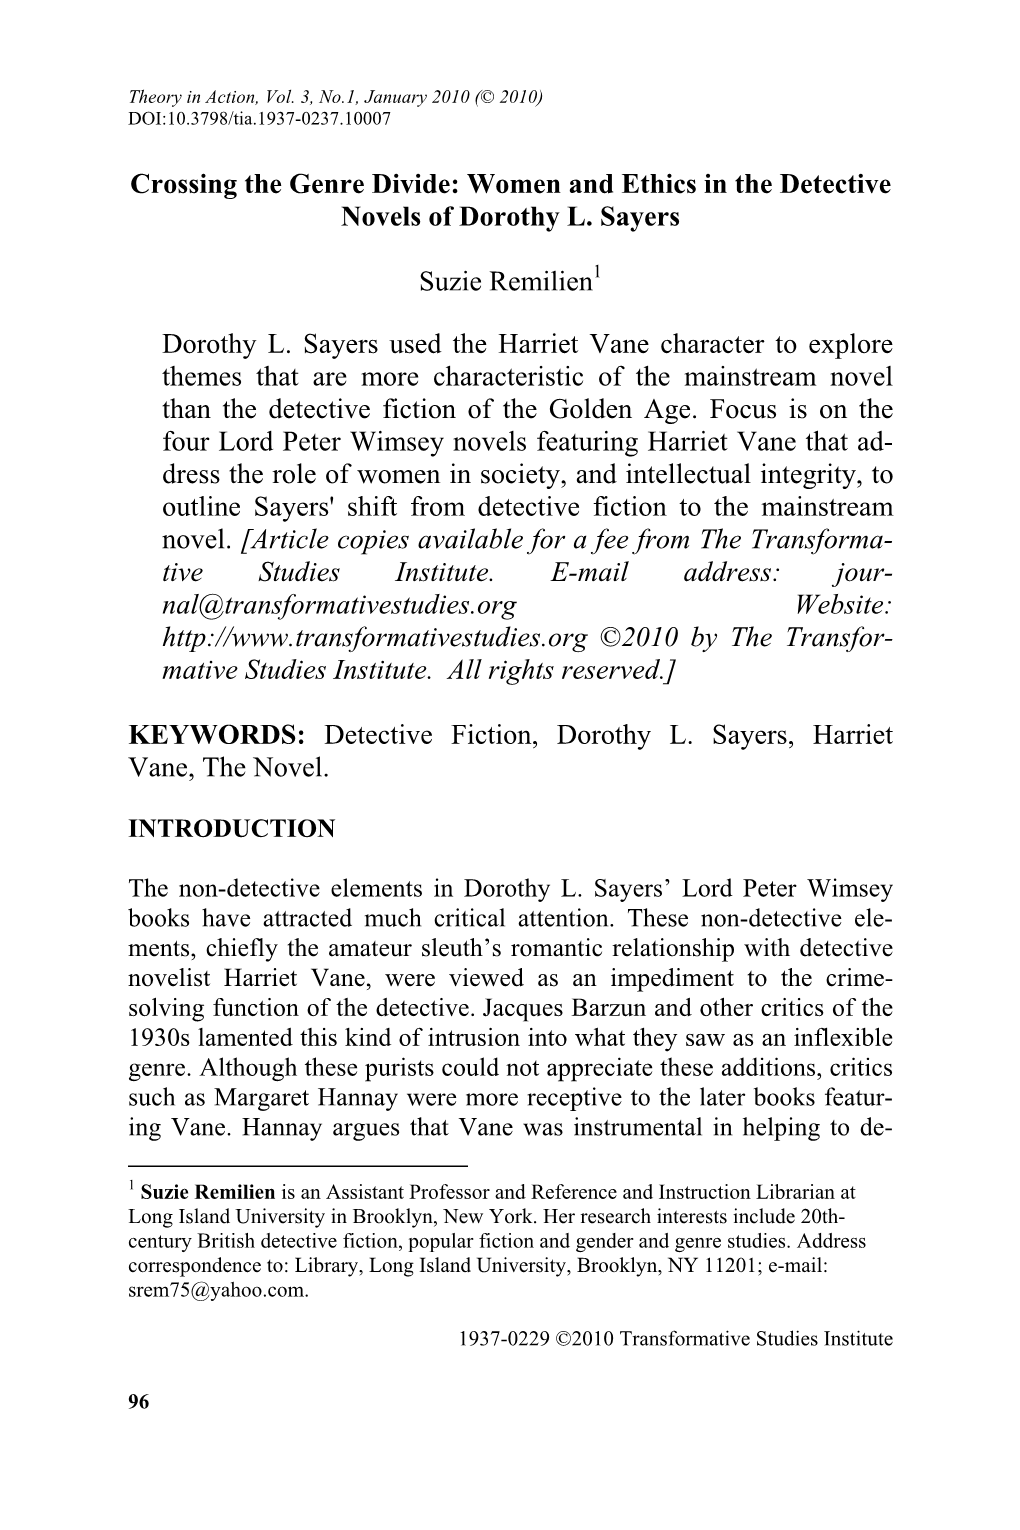 Women and Ethics in the Detective Novels of Dorothy L. Sayers